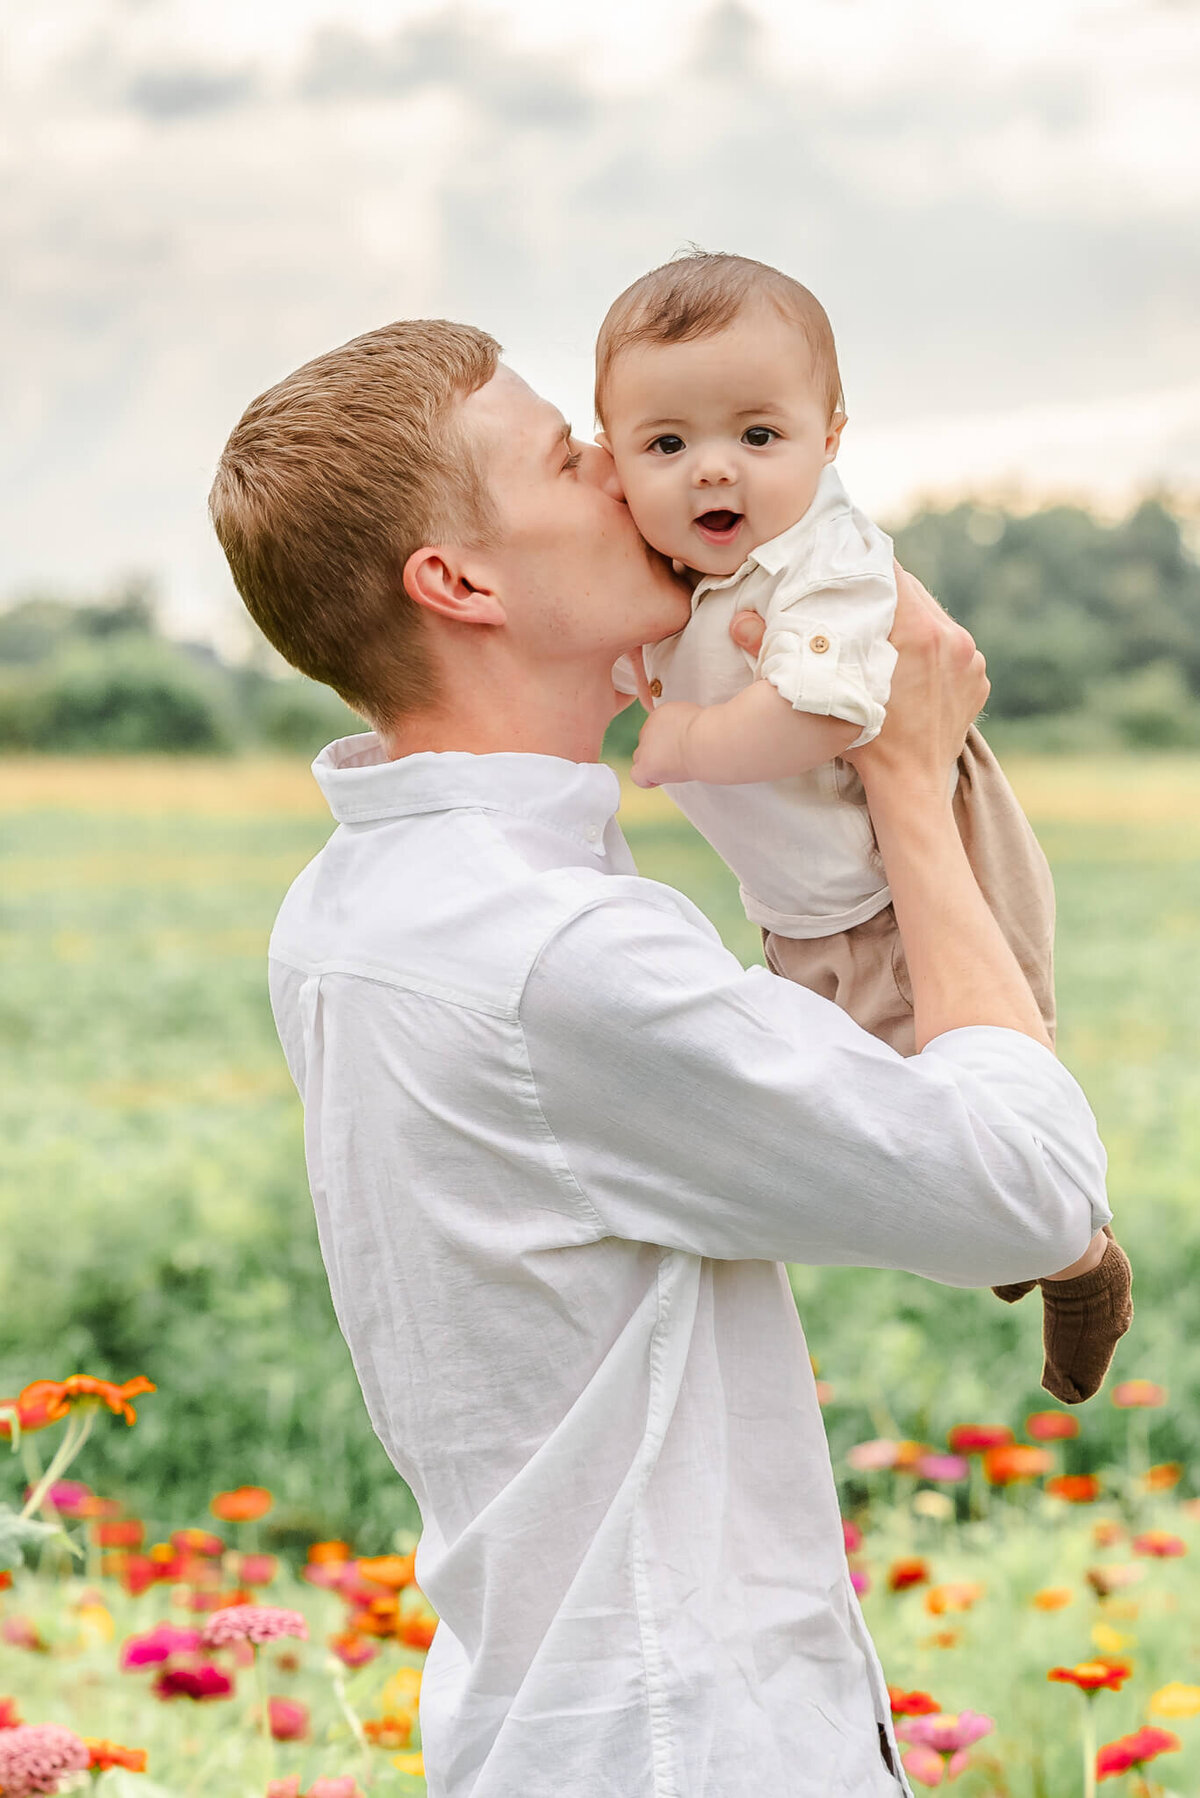 A man wearing a white shirt holds up his infant son and gives him a kiss on the cheek. Image by Justine Renee Photography near the Outer Banks.